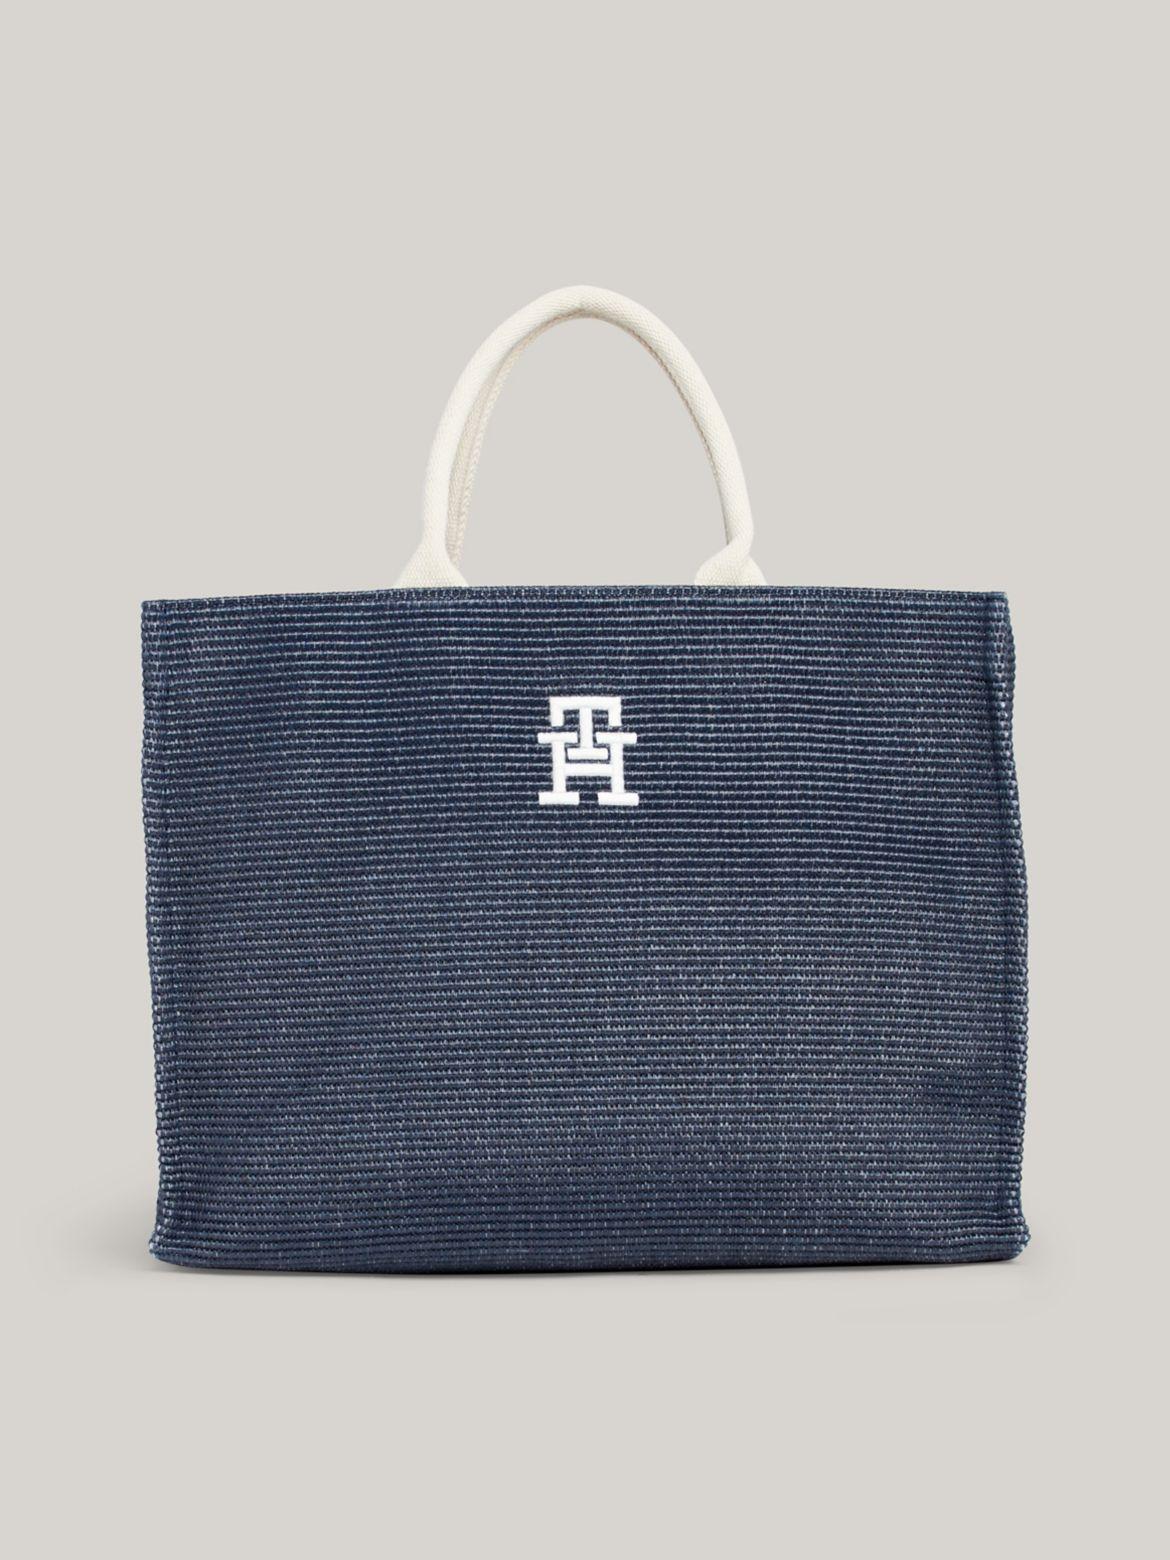 Tommy Hilfiger Women's TH Logo Beach Tote Product Image